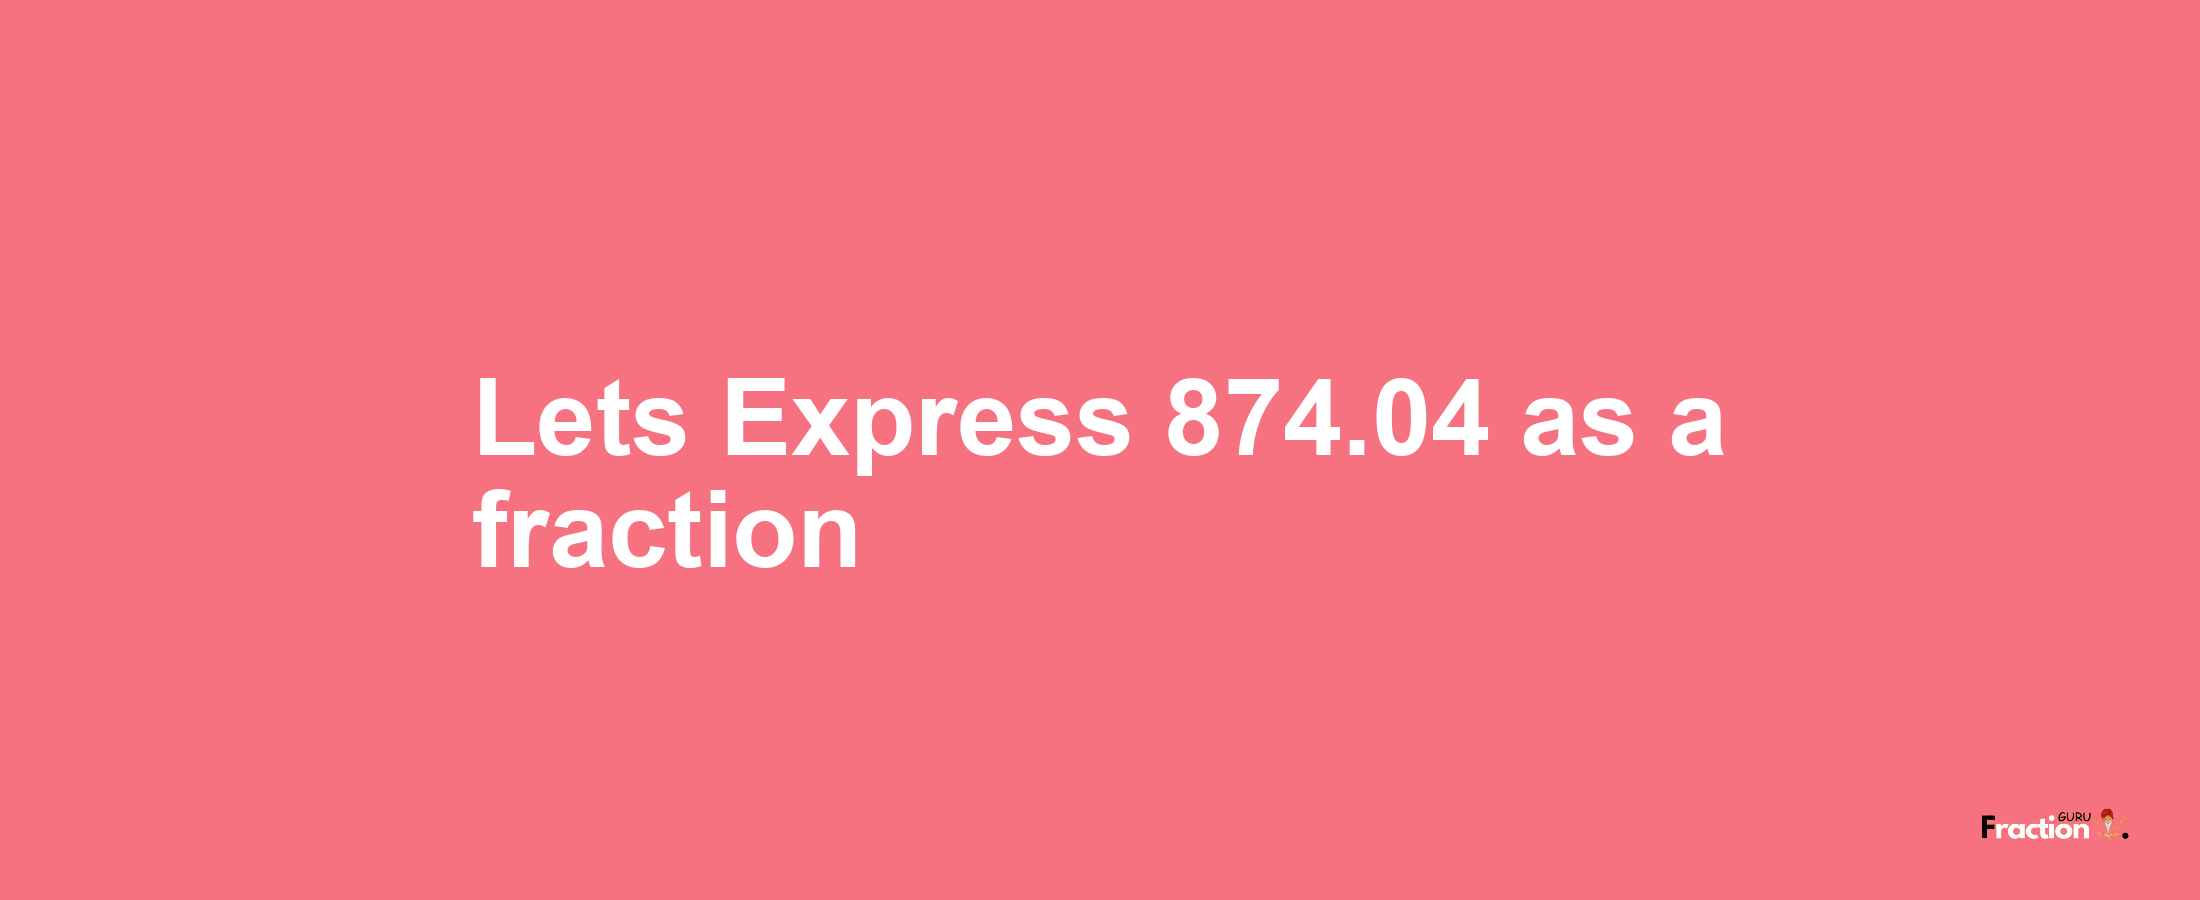 Lets Express 874.04 as afraction